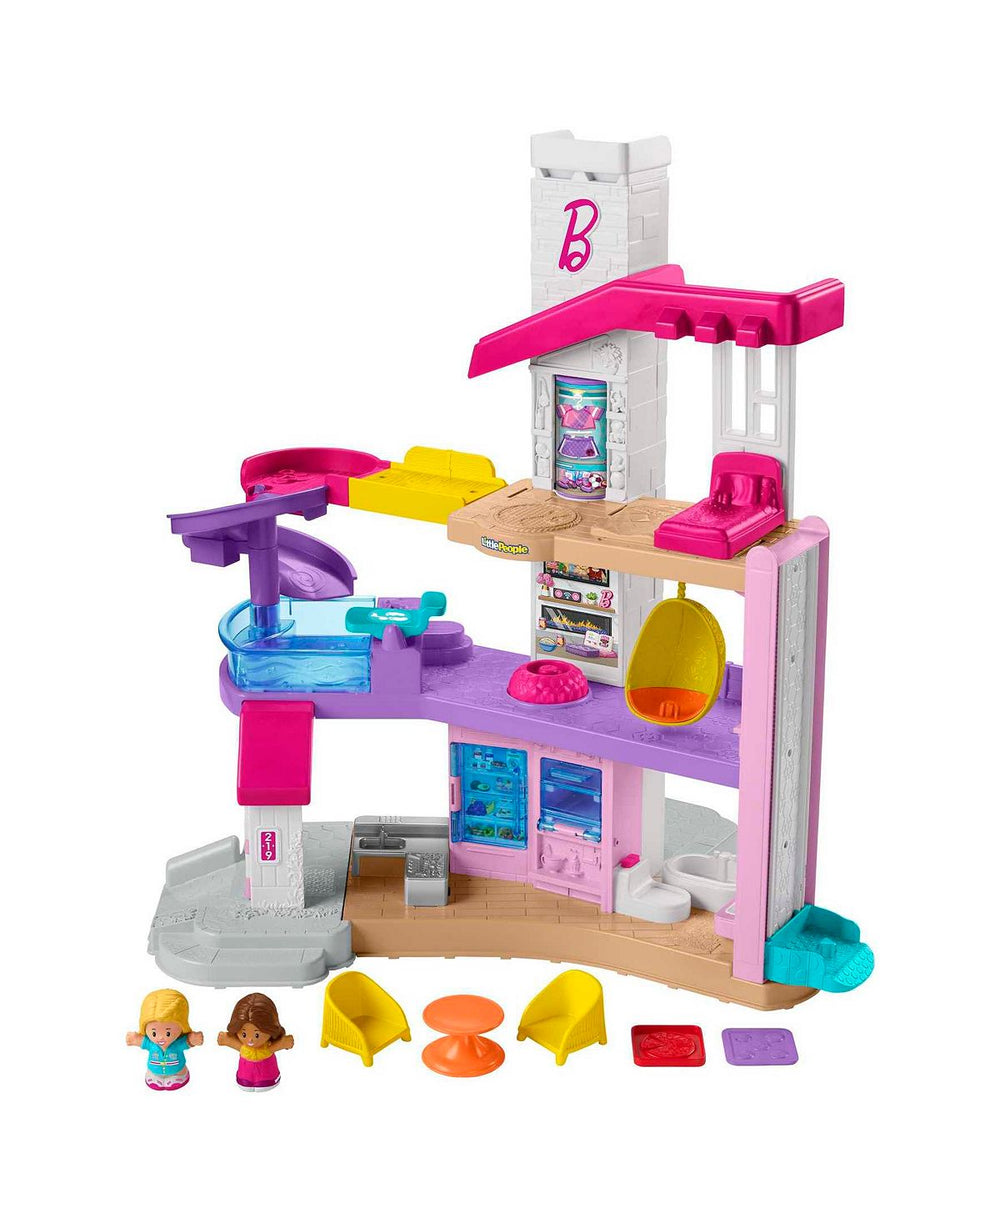 Little People Barbie DreamHouse Toddler Playset with Lights and Sounds